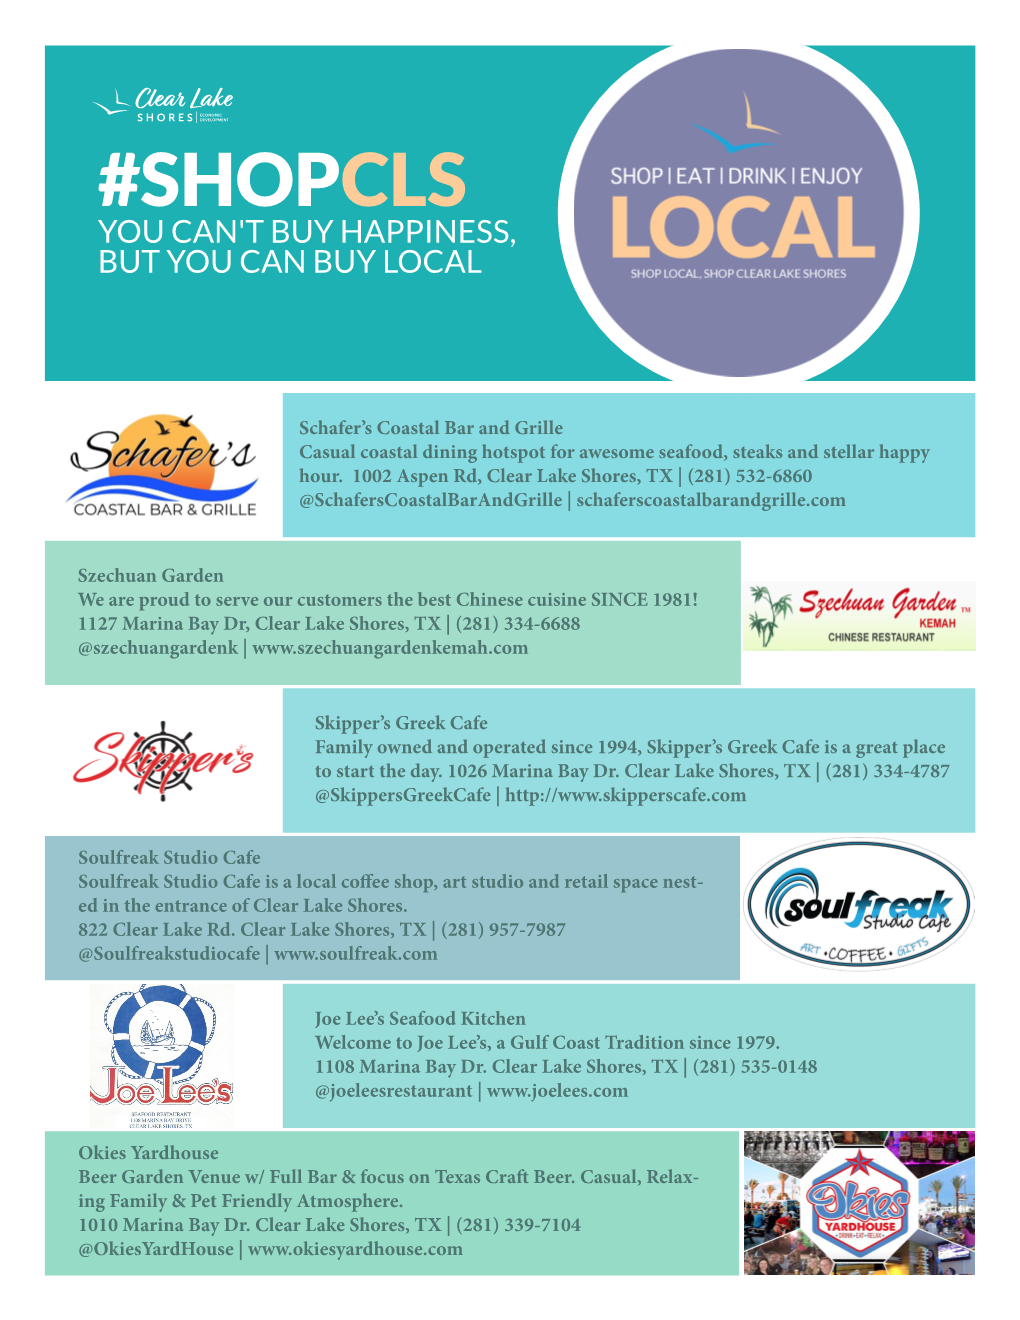 Shopcls You Can't Buy Happiness, but You Can Buy Local